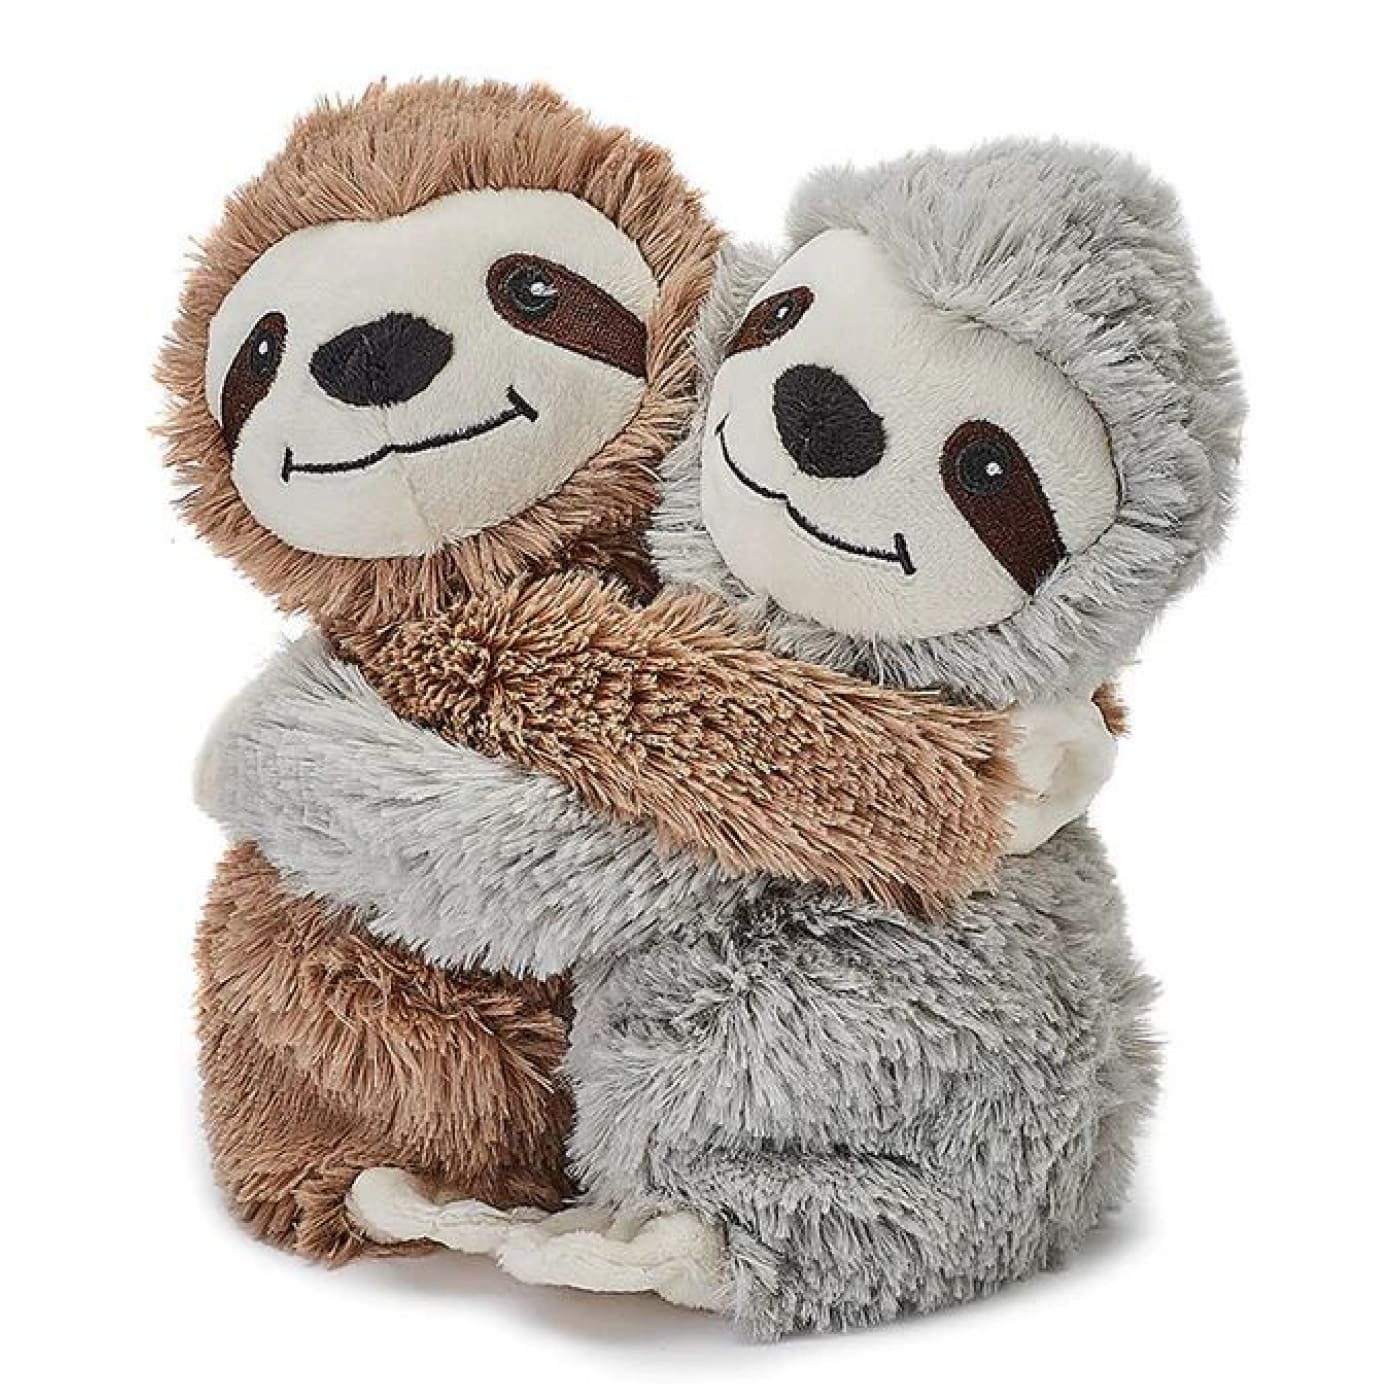 Warmies Heatable Soft Toy Scented with French Lavender - Hugs Sloths - Hugs Sloths - HEALTH & HOME SAFETY - THERMOMETERS/MEDICINAL